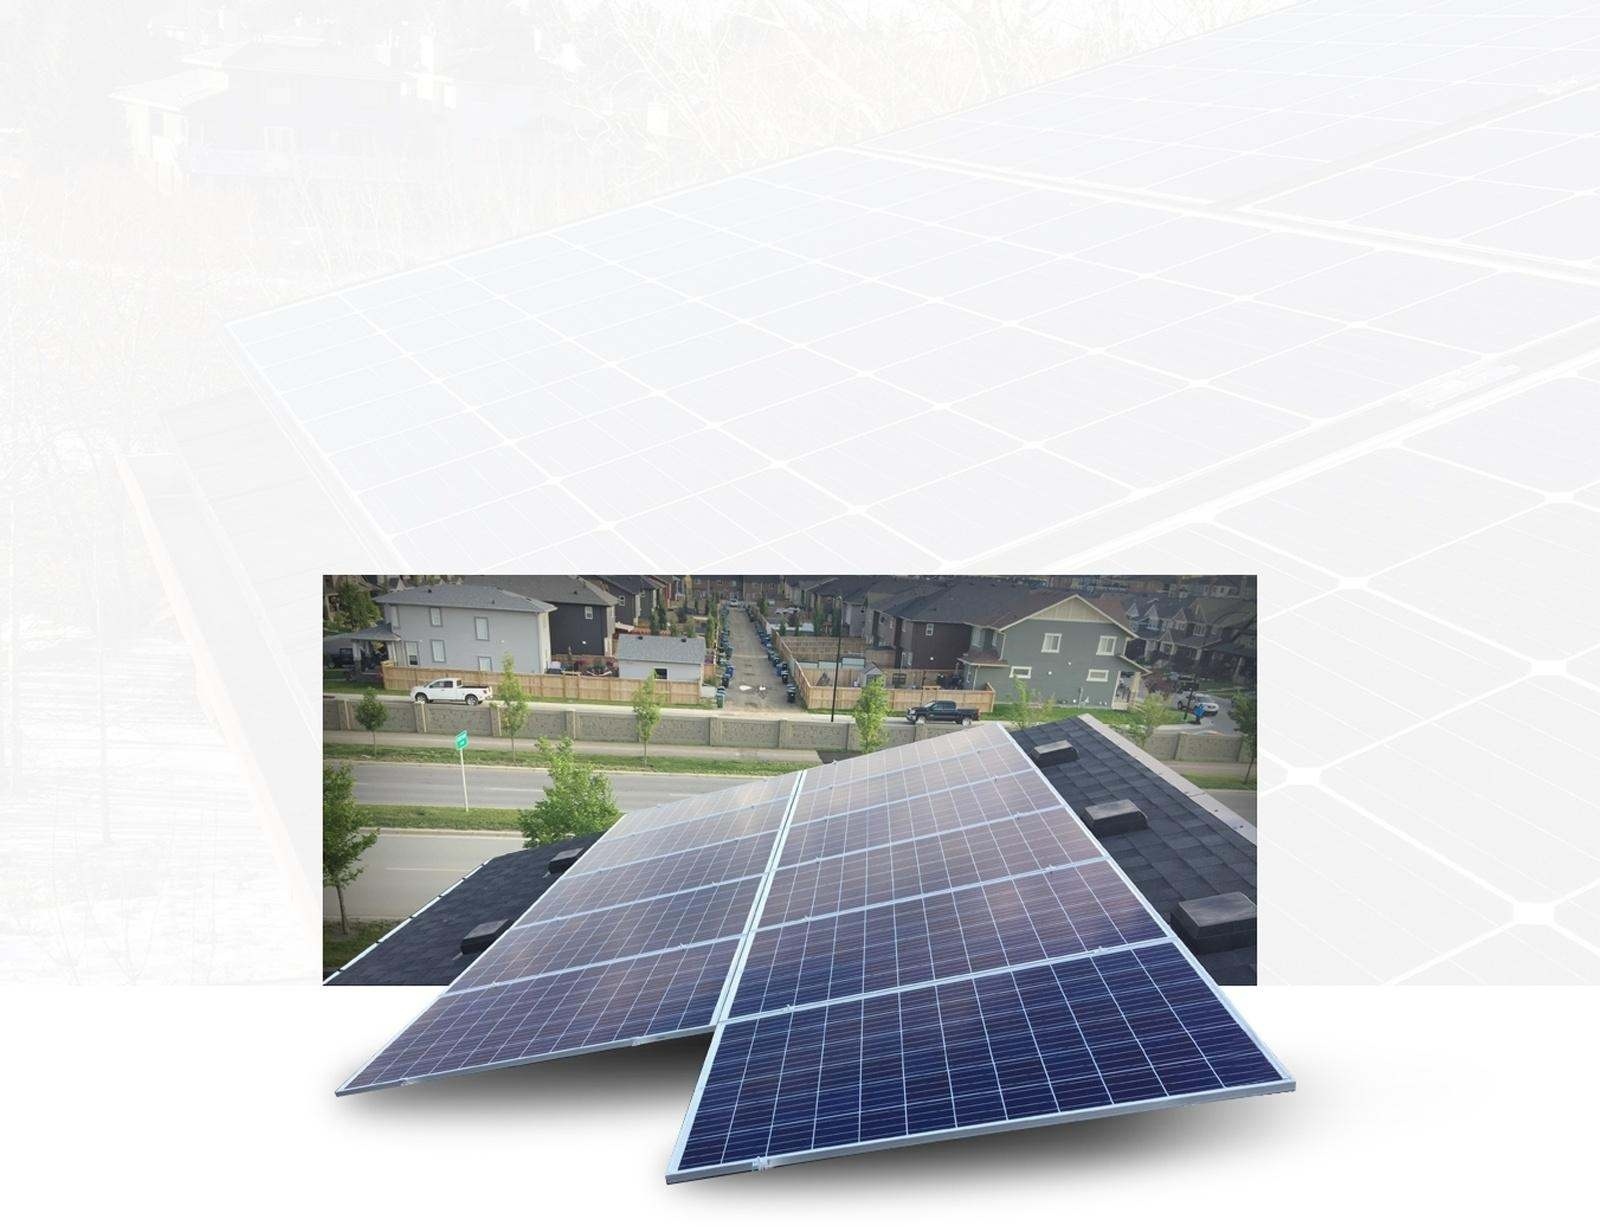 Kilts & Cables Solar & Electrical help to power up your life with our solar panel installation services in Alberta